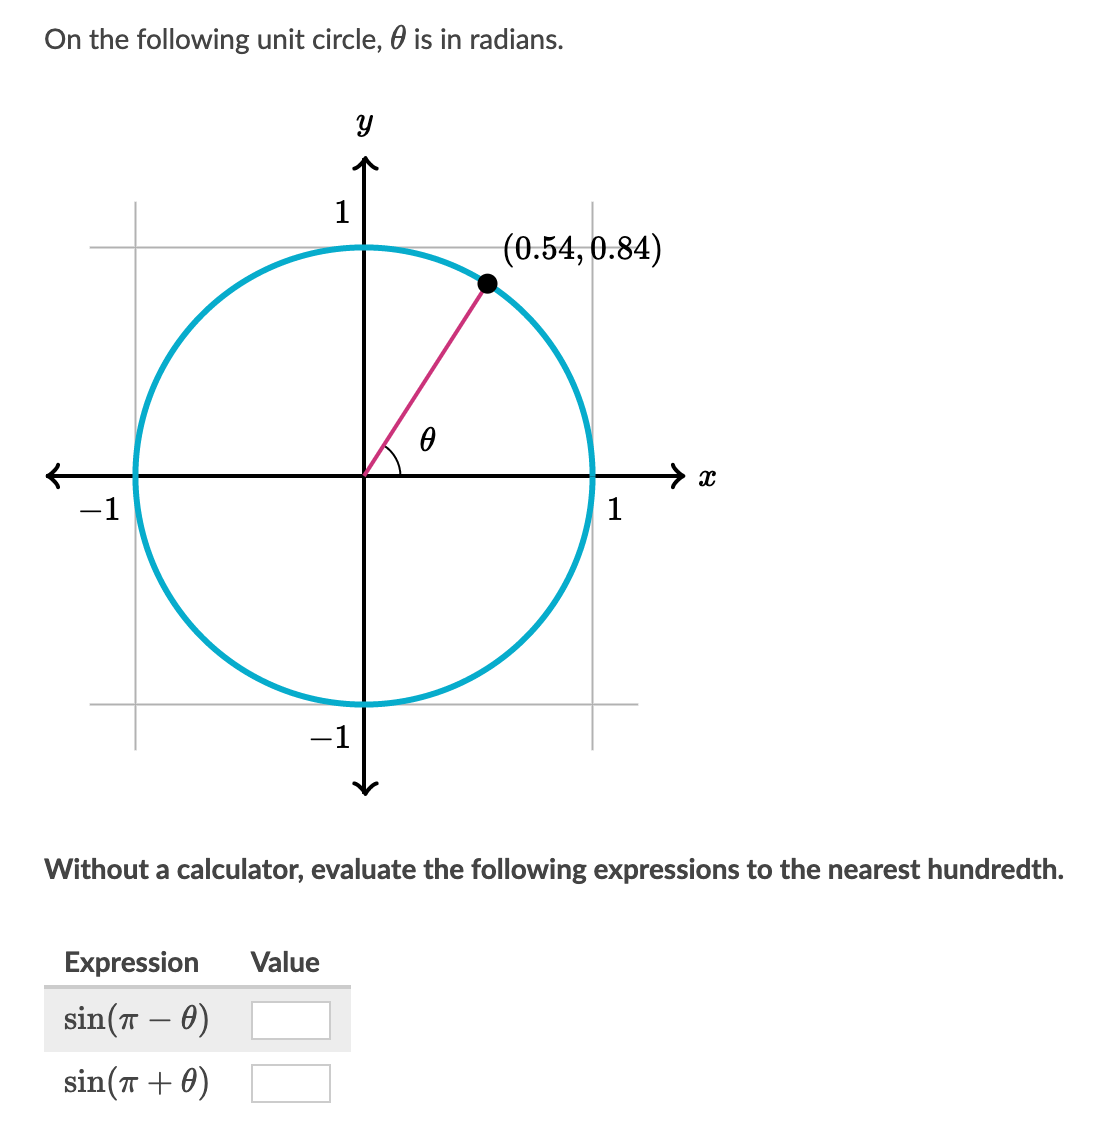 On the following unit circle, 0 is in radians.
1
(0.54,0.84)
-1
1
-1
Without a calculator, evaluate the following expressions to the nearest hundredth.
Expression
Value
sin(T – 0)
sin(T + 0)
